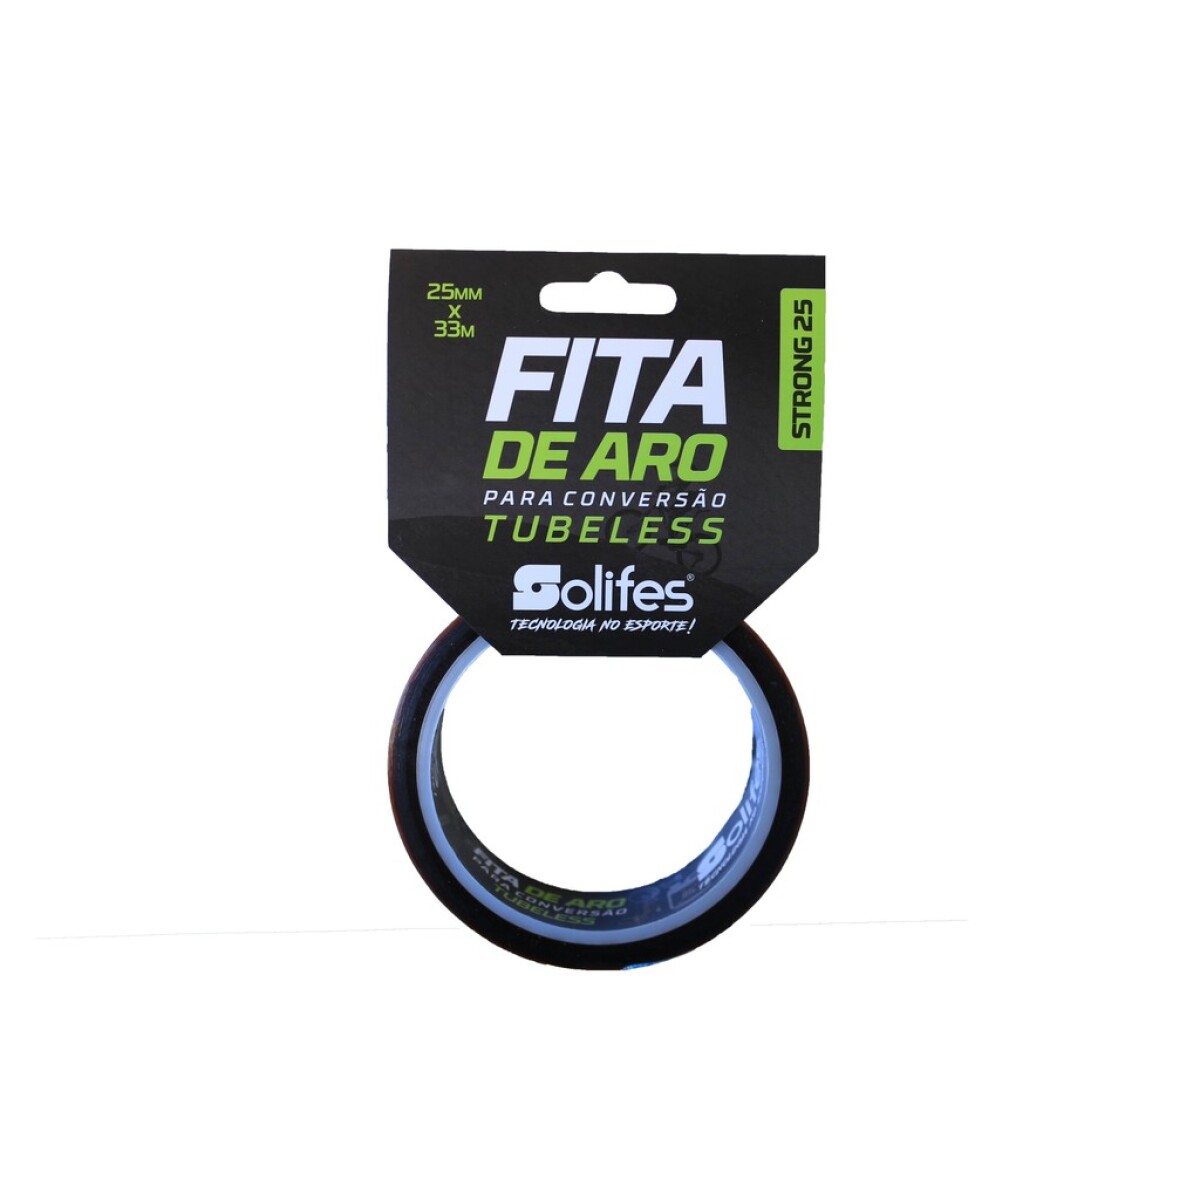 Cinta Tubeless Solifes 15m X 19mm 100% Polyester 